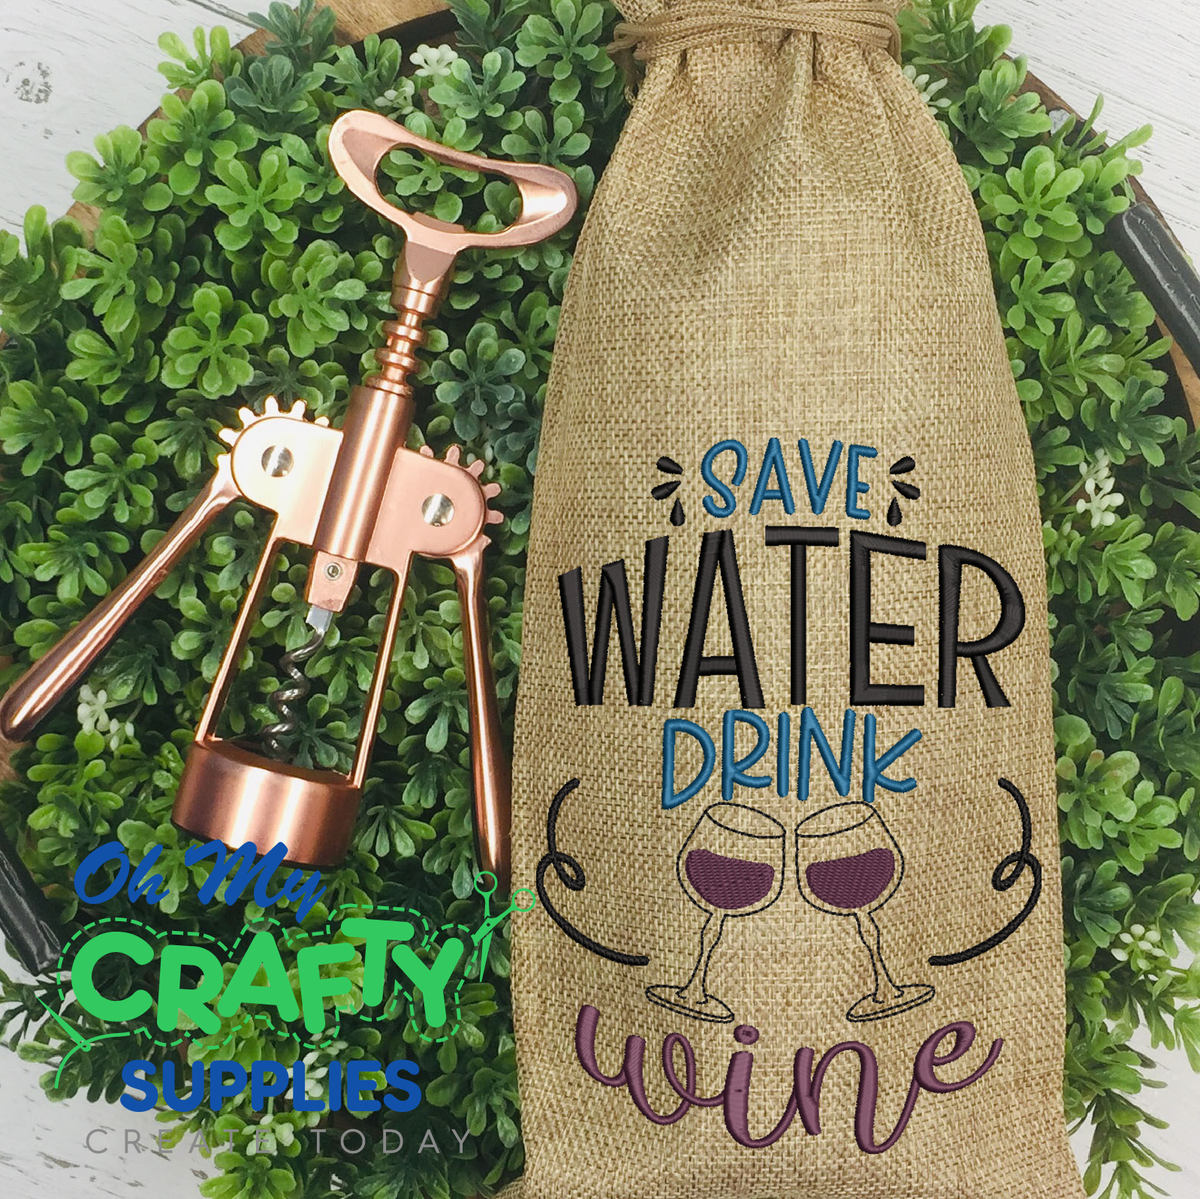 Save Water Drink Wine 2021 Embroidery Design - Oh My Crafty Supplies Inc.